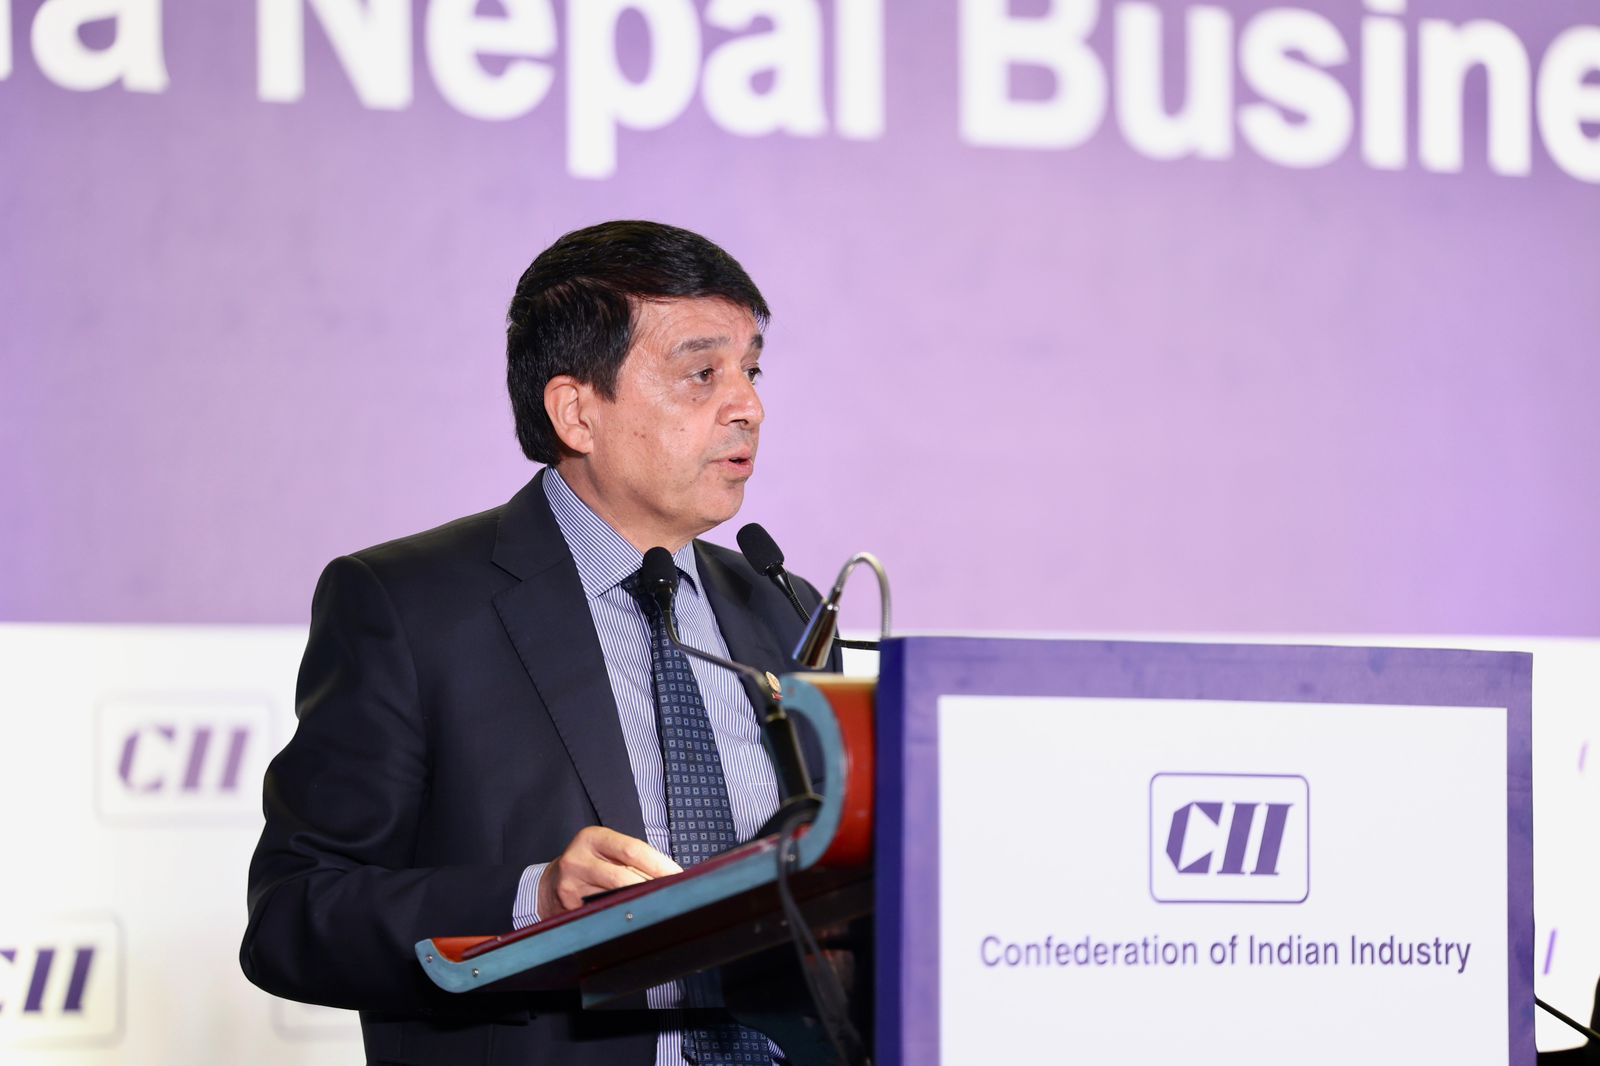 President Dhakal asks Indian business community to explore Nepal’s unique opportunities